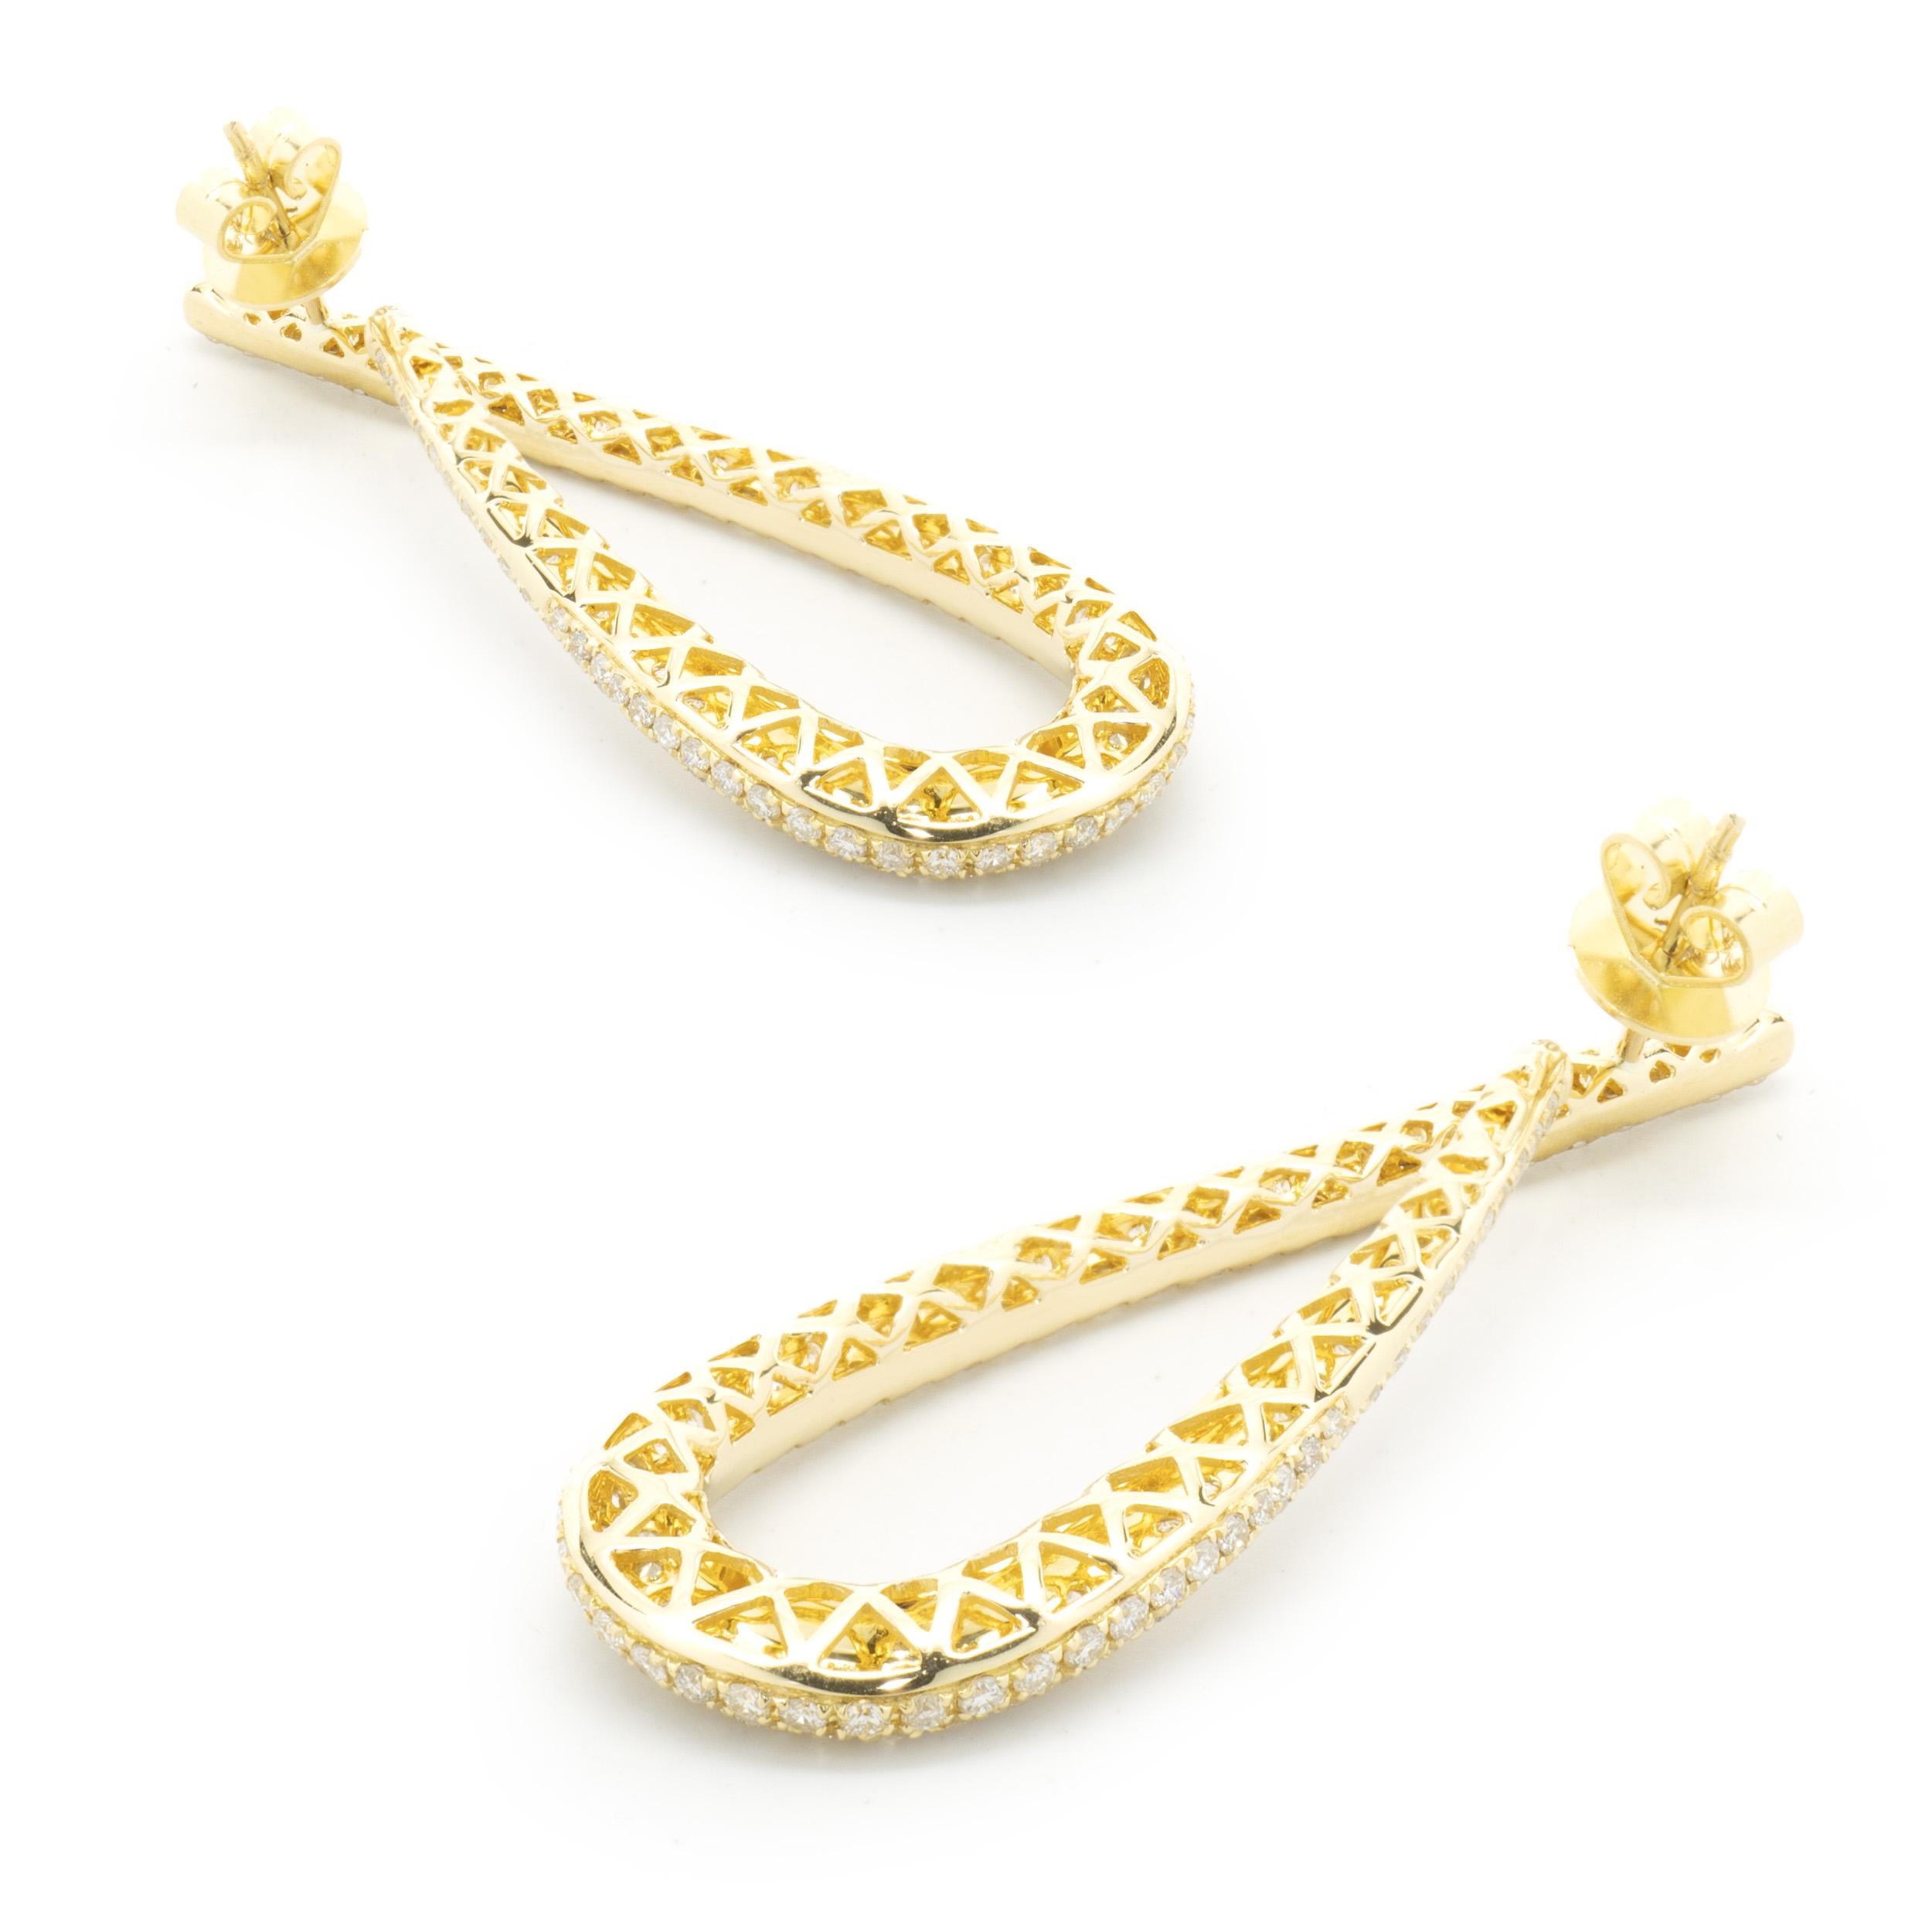 18 Karat Yellow Gold Pave Diamond Loop Through Drop Earrings In Excellent Condition For Sale In Scottsdale, AZ